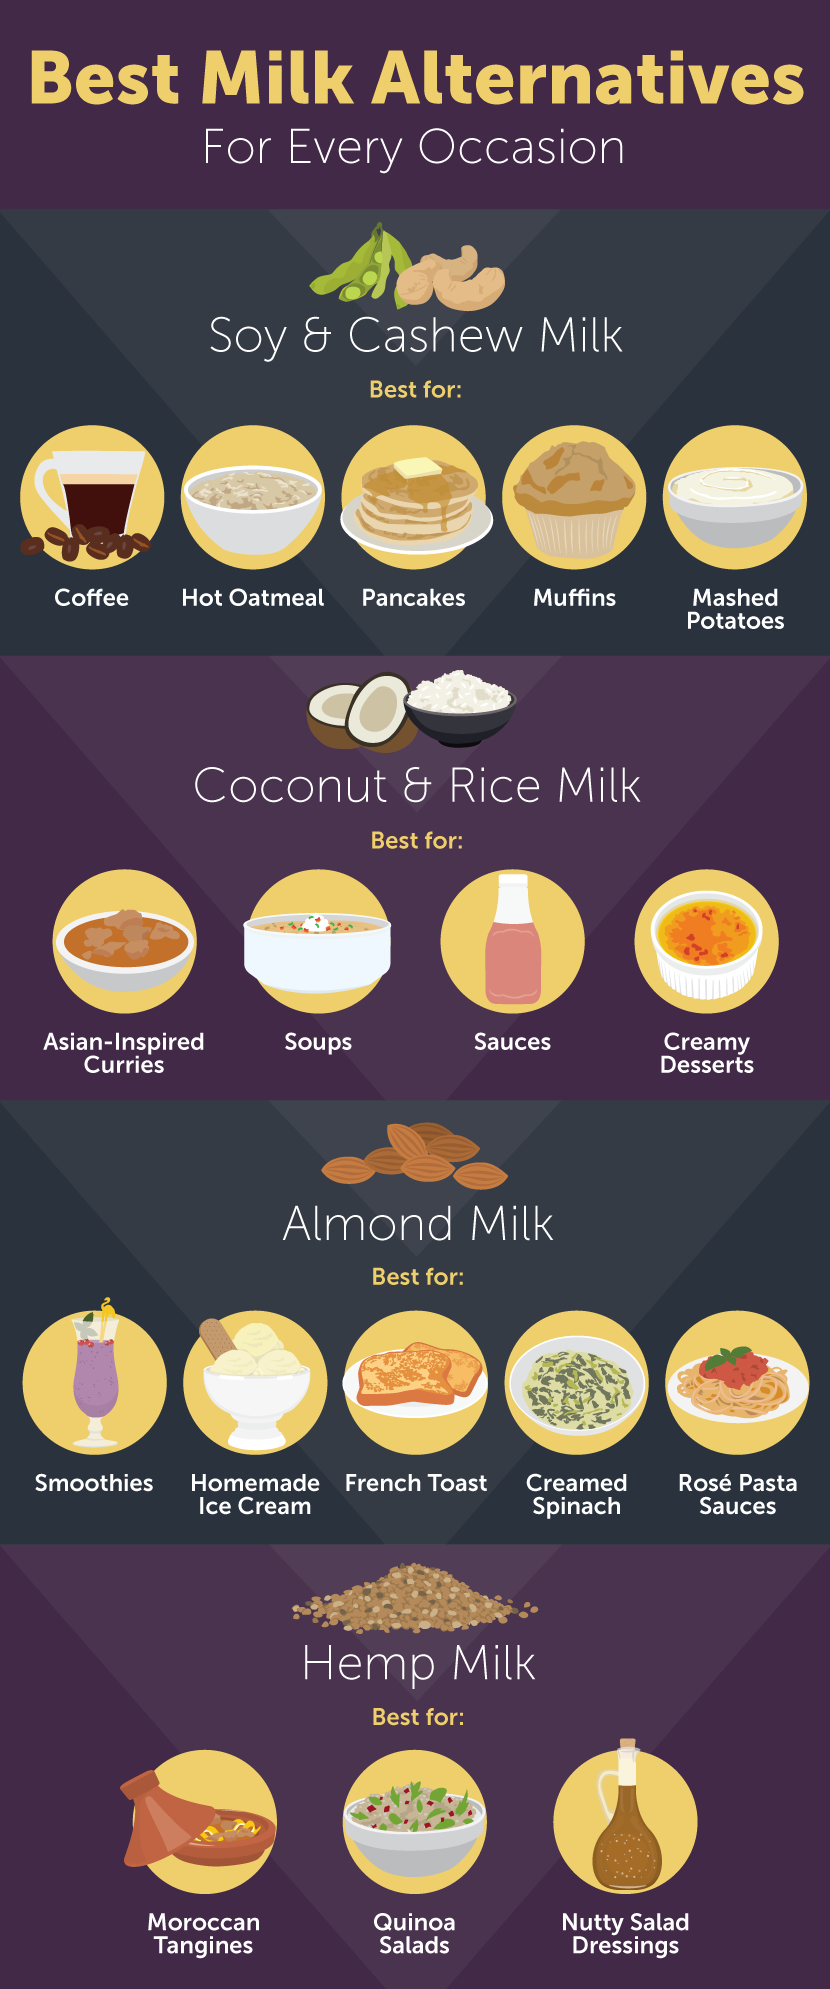 Best Milk Alternatives And What They Can Be Used For Infographic